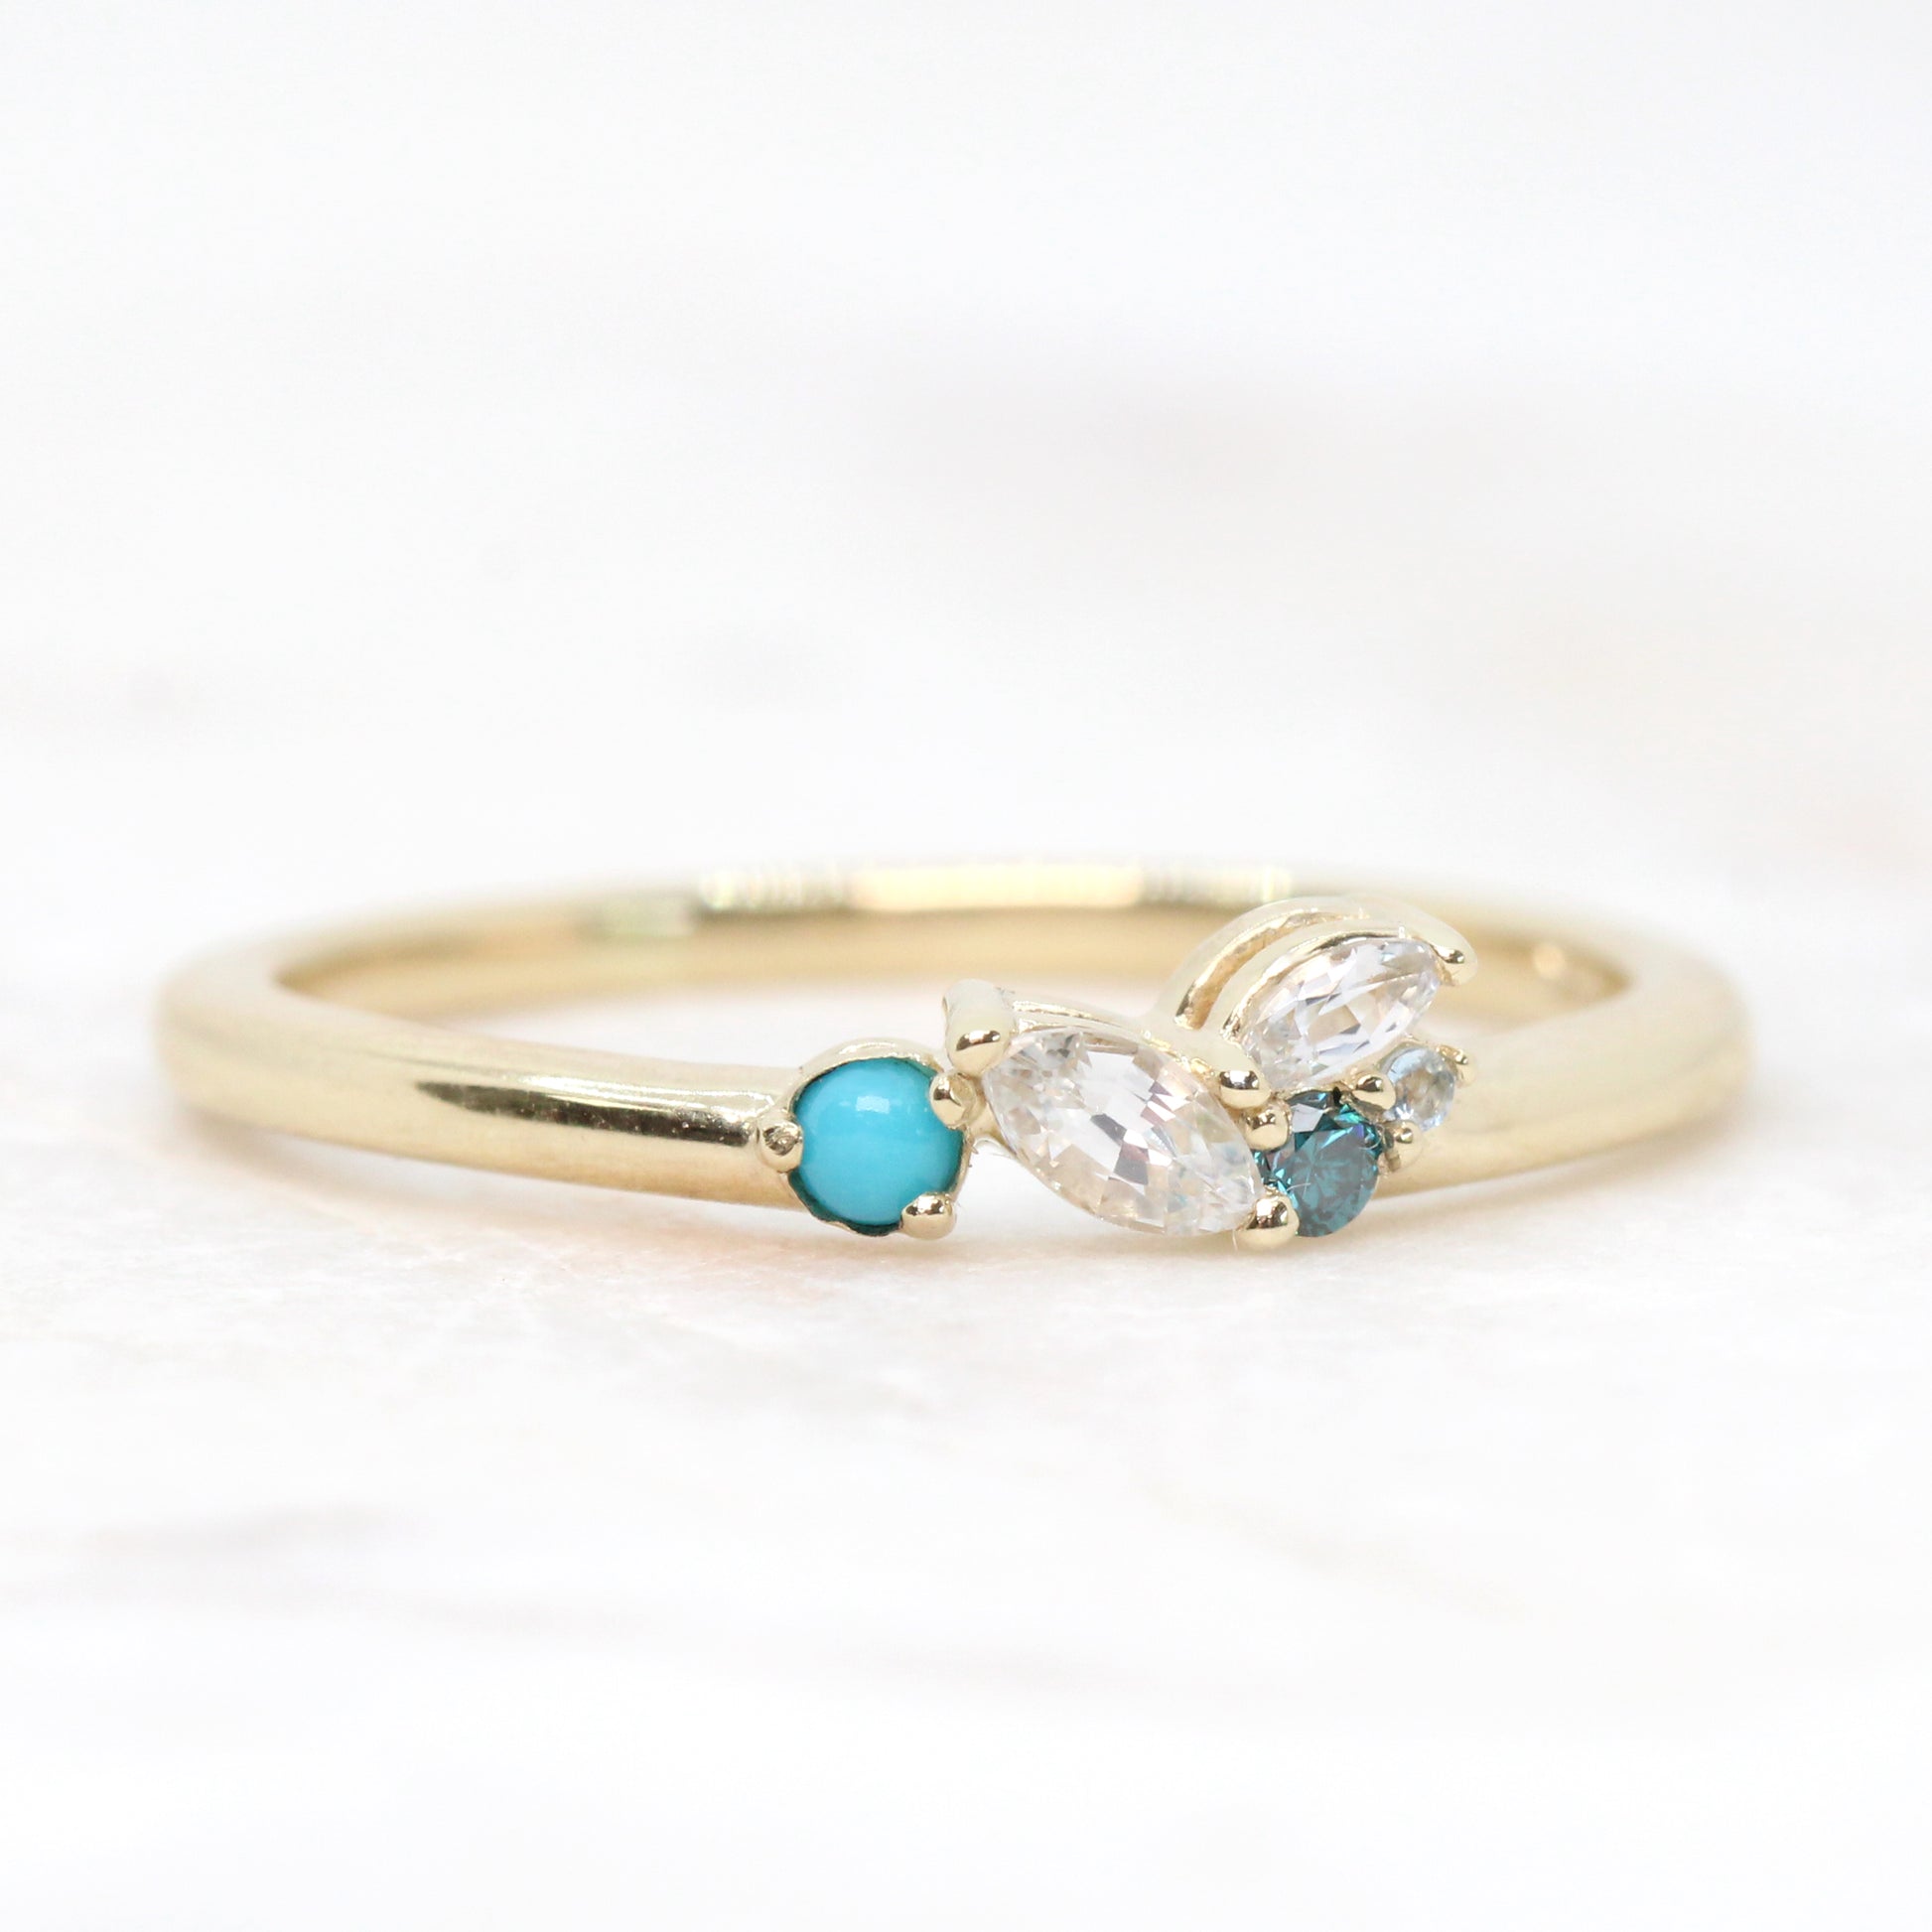 Anna Turquoise Aquamarine Sapphire Diamond Gemstone Cluster Stackable or Wedding Ring - Your choice of metal - Custom - Midwinter Co. Alternative Bridal Rings and Modern Fine Jewelry